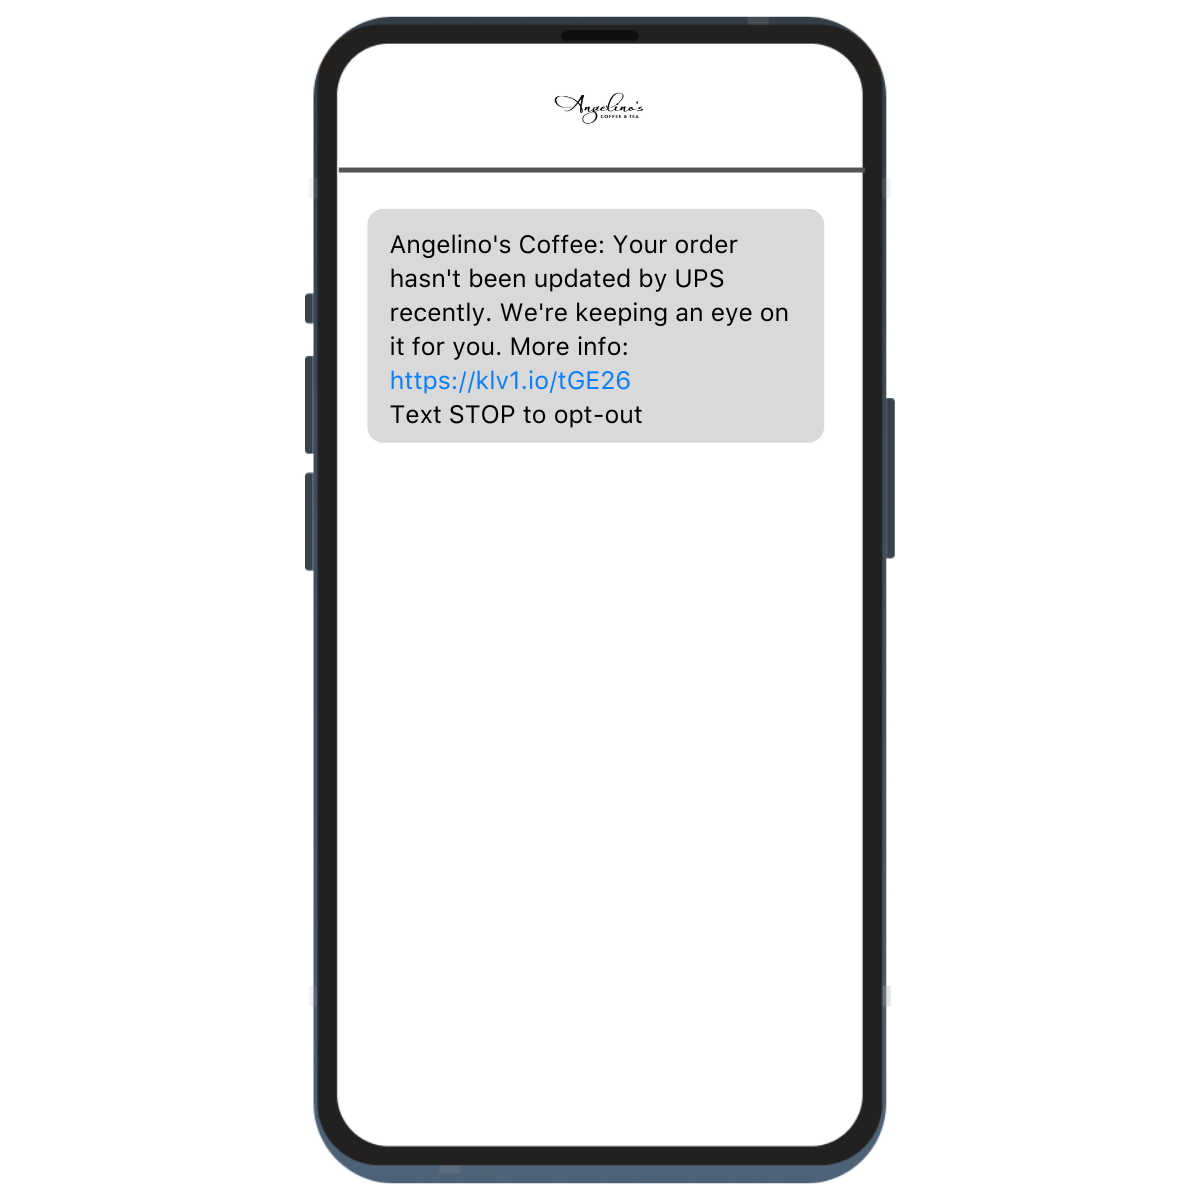 Angelino's Coffee Delayed Shipment Notification Food and Beverage SMS 